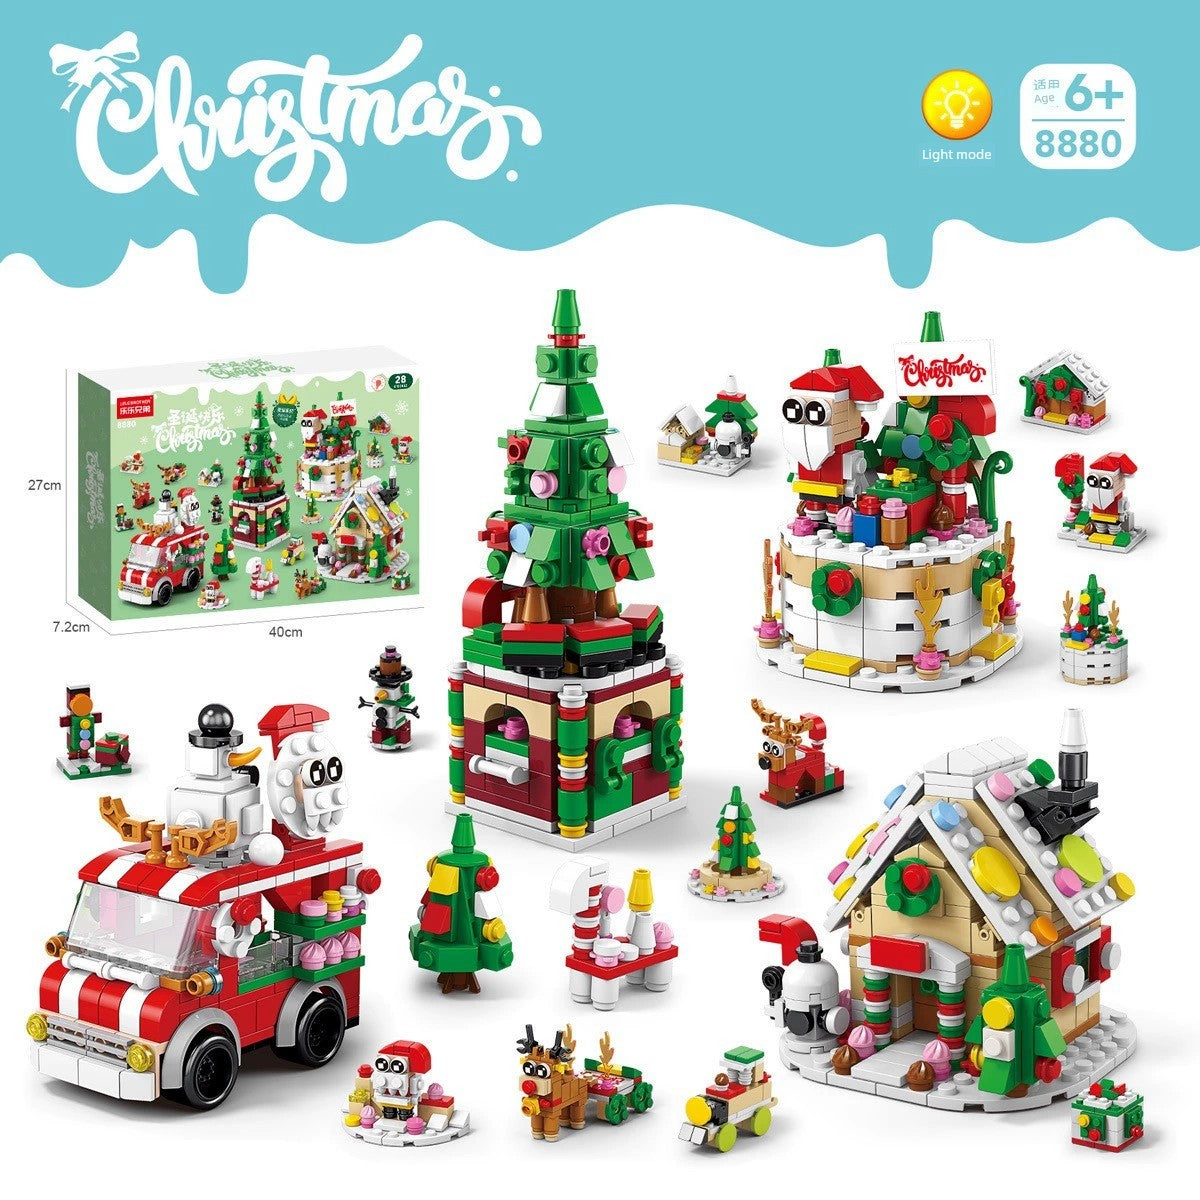 Lele Brothers 8967-1 Christmas Train Blind Box Elk Small Particles China Building Blocks Toy Children's Day Gift